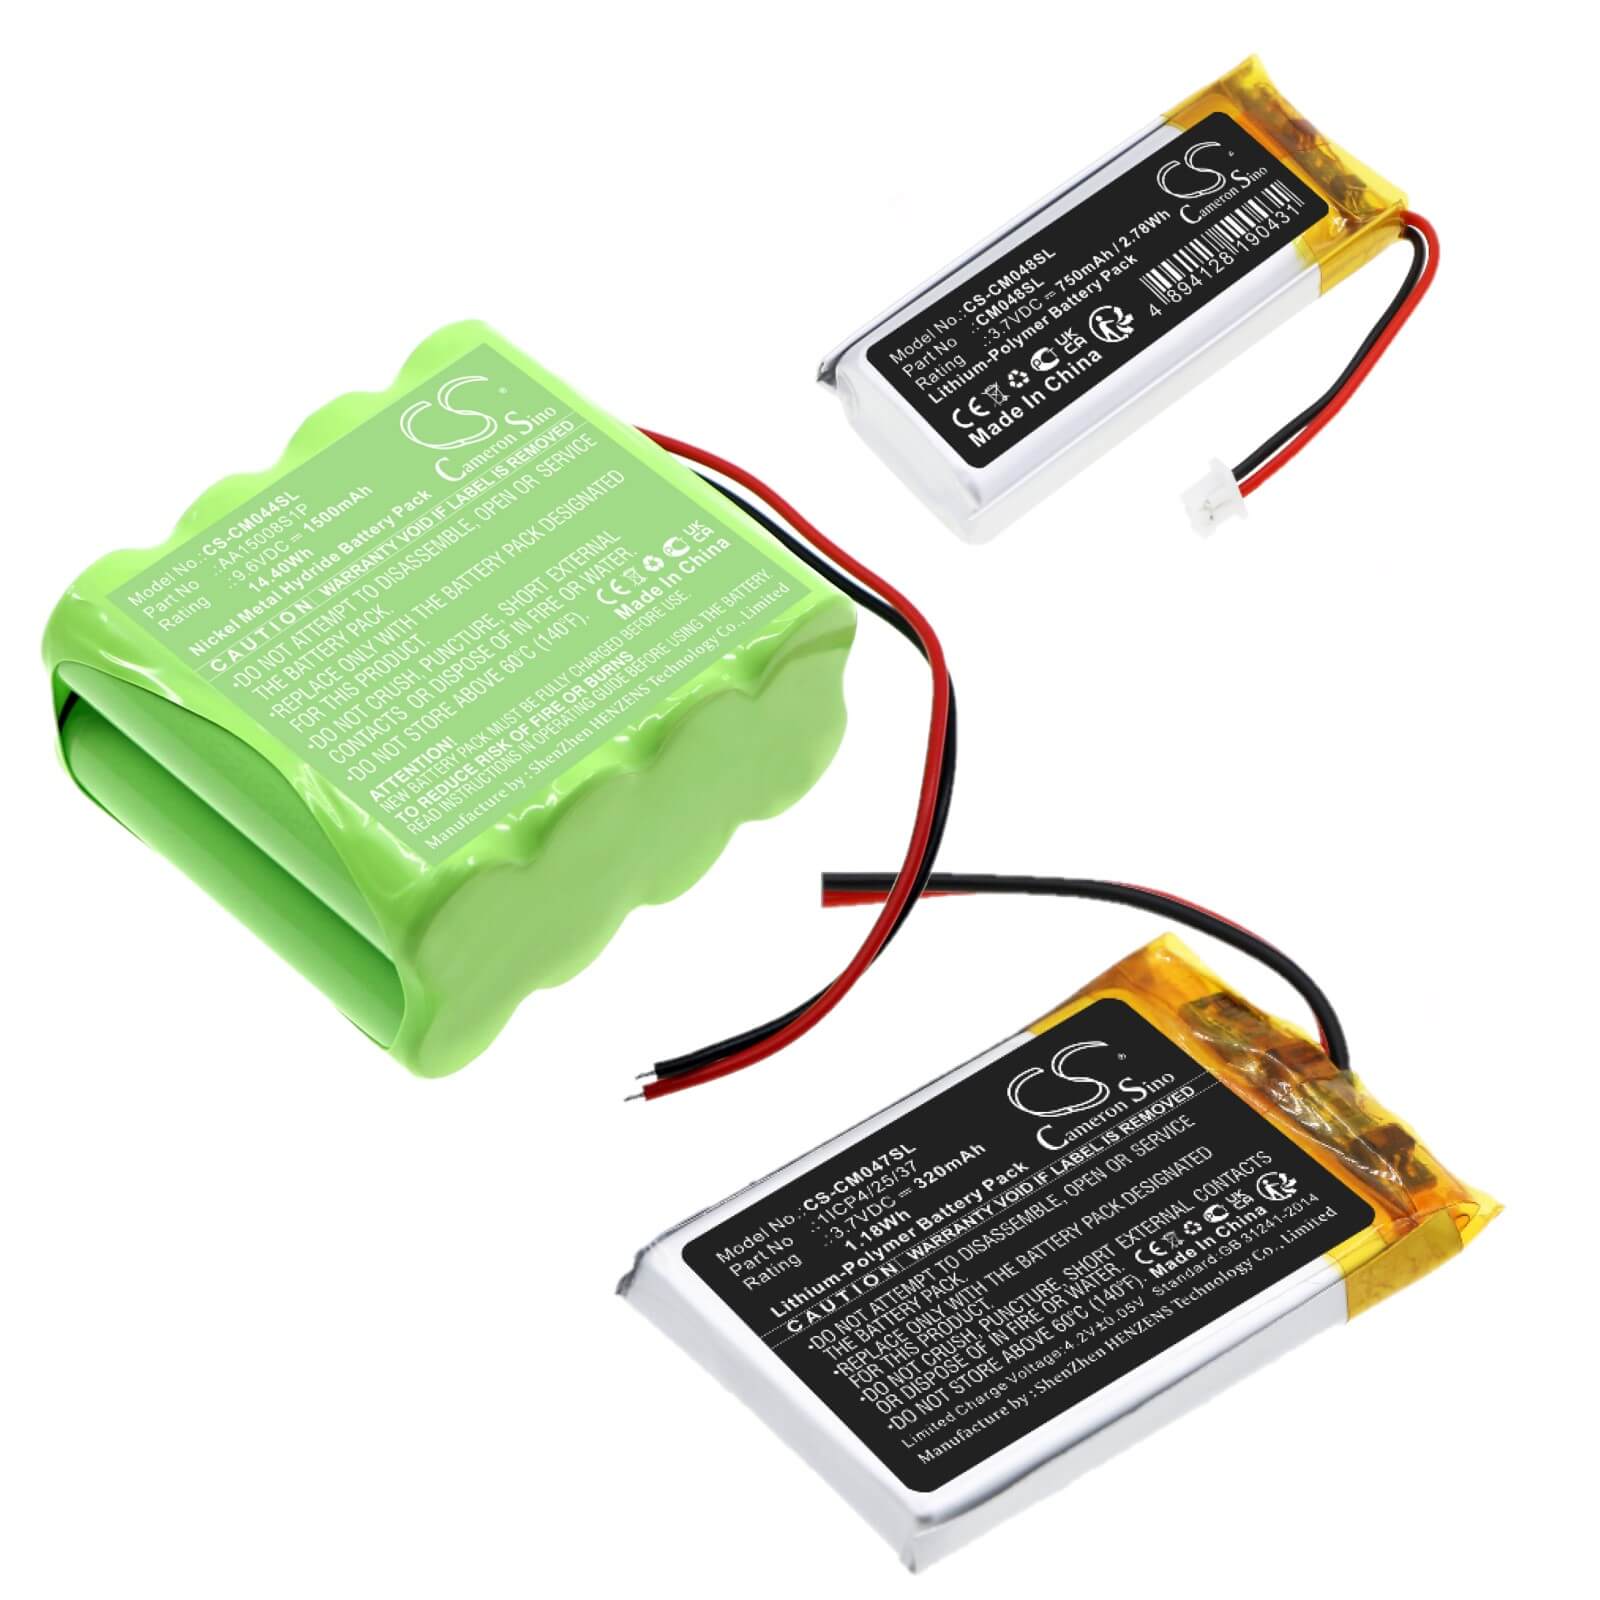 Search for a battery with leads